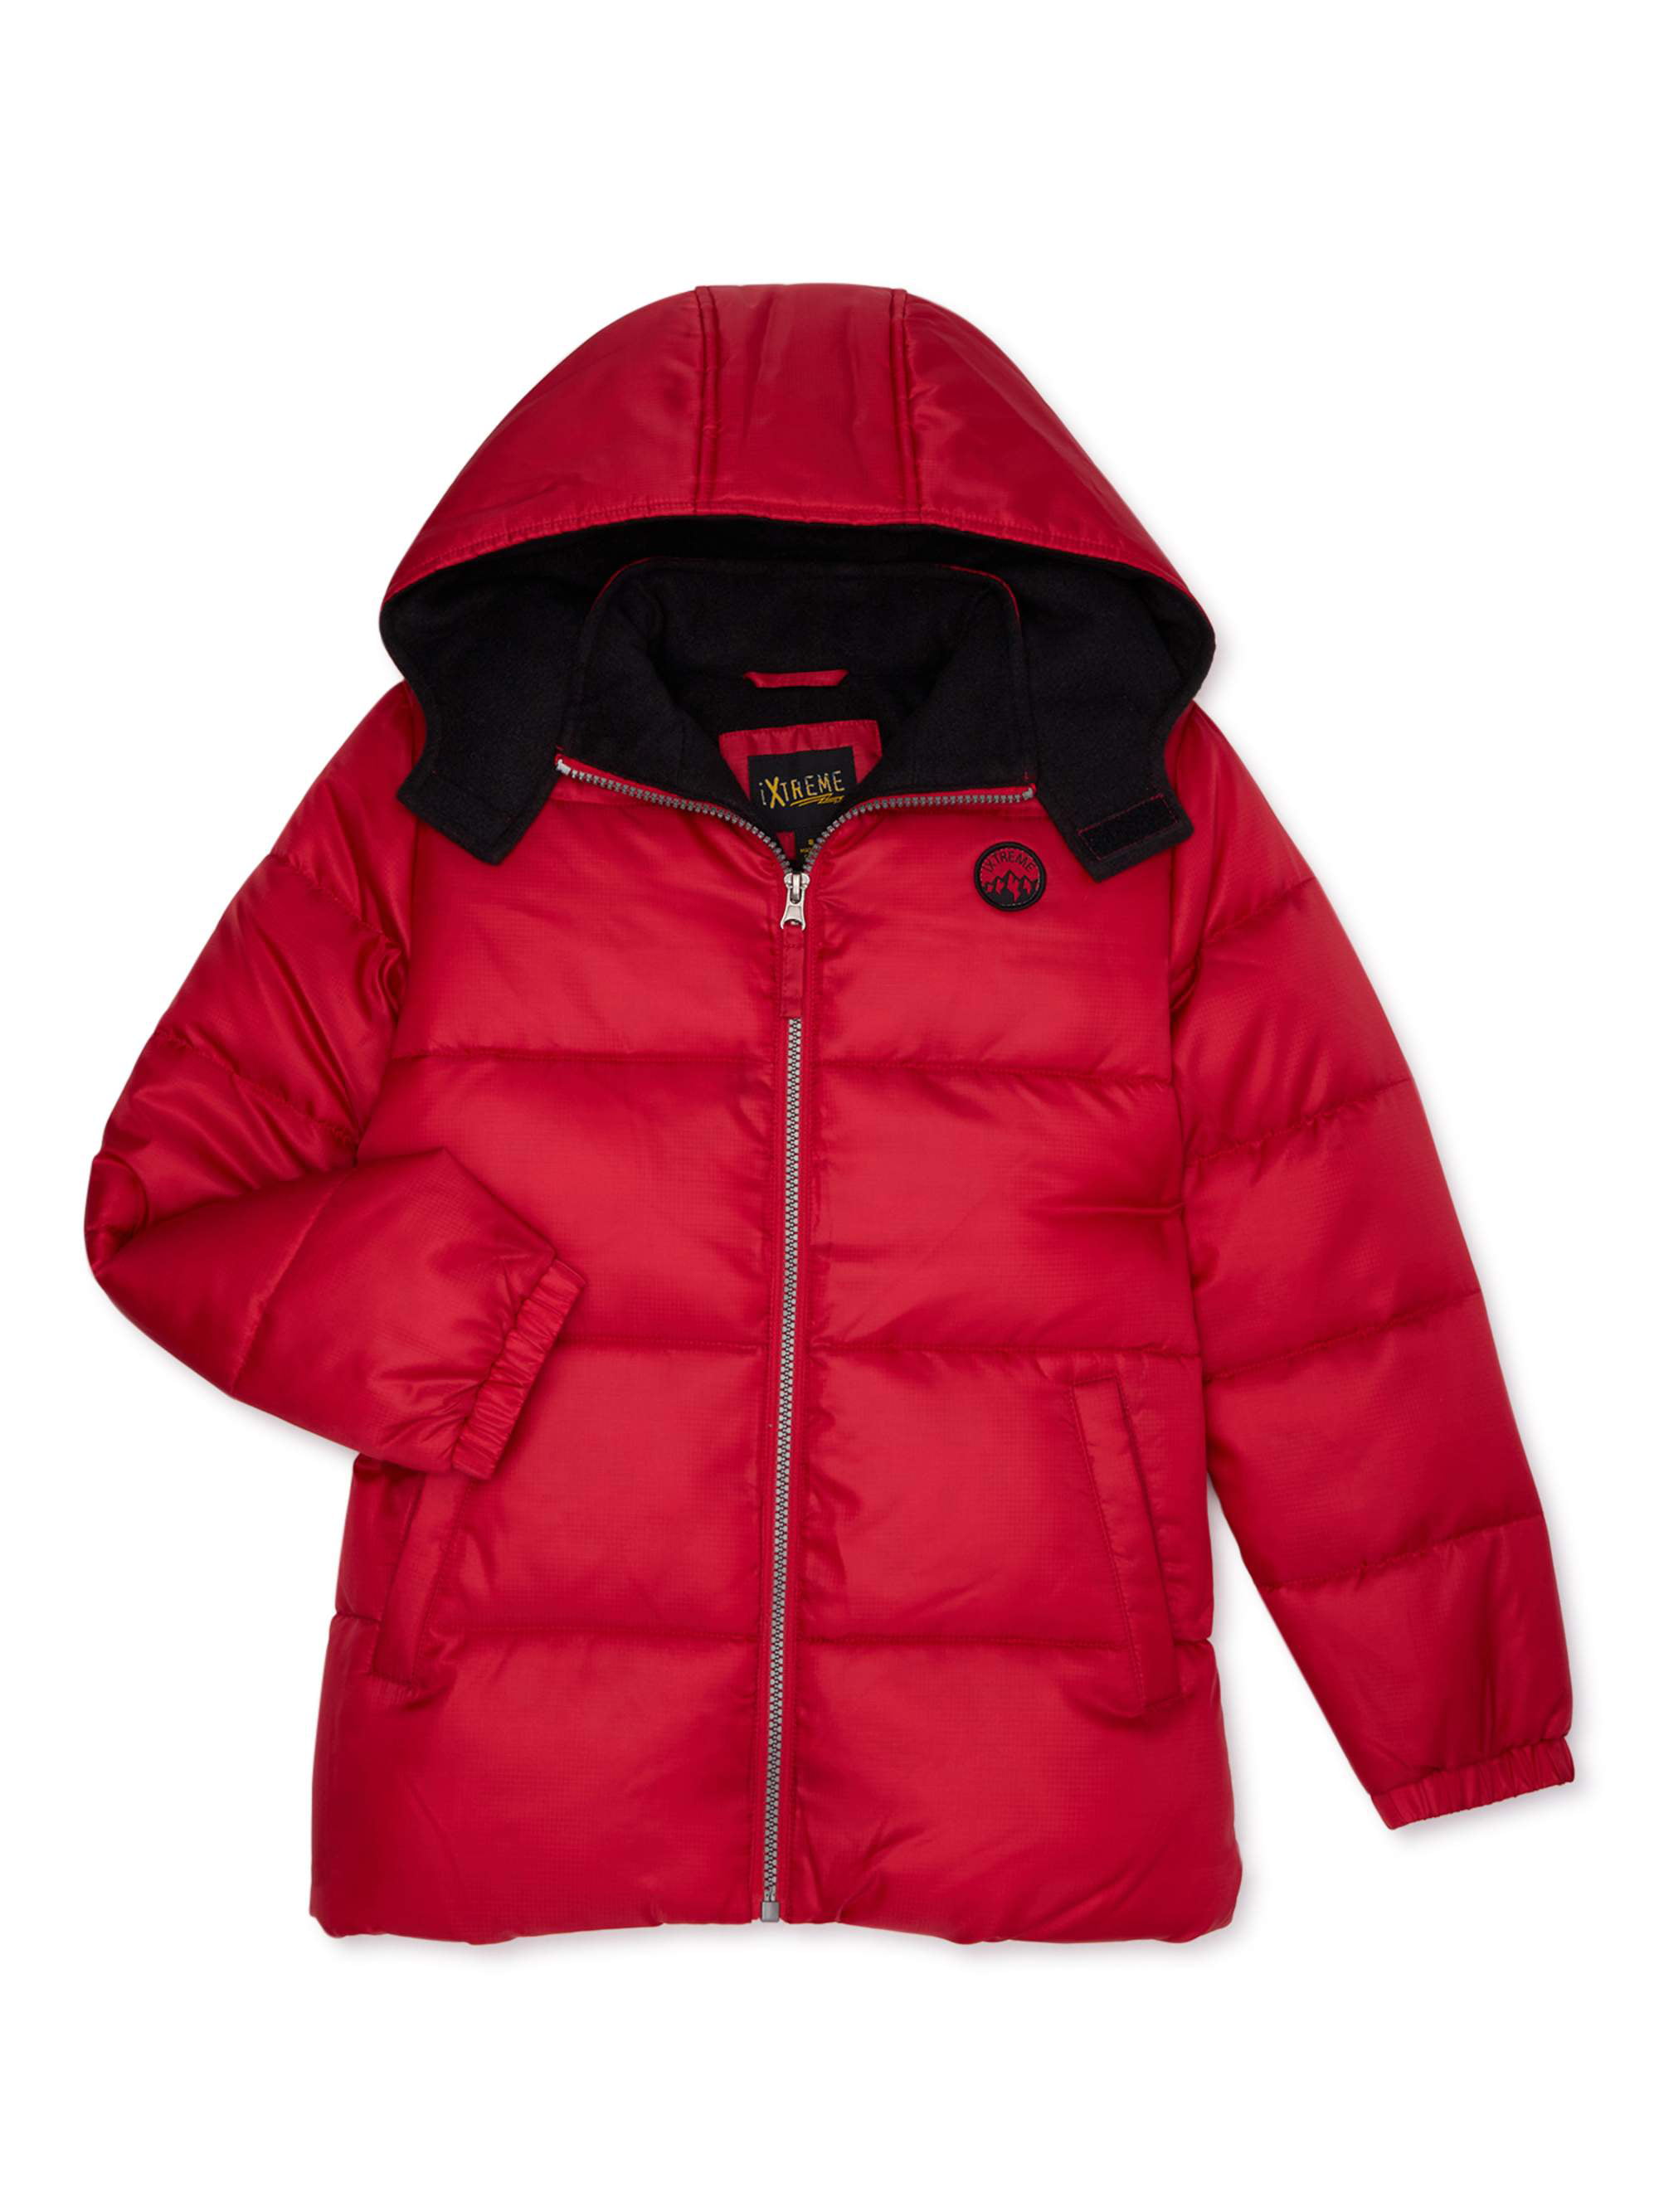 iXtreme Boys Ripstop Puffer